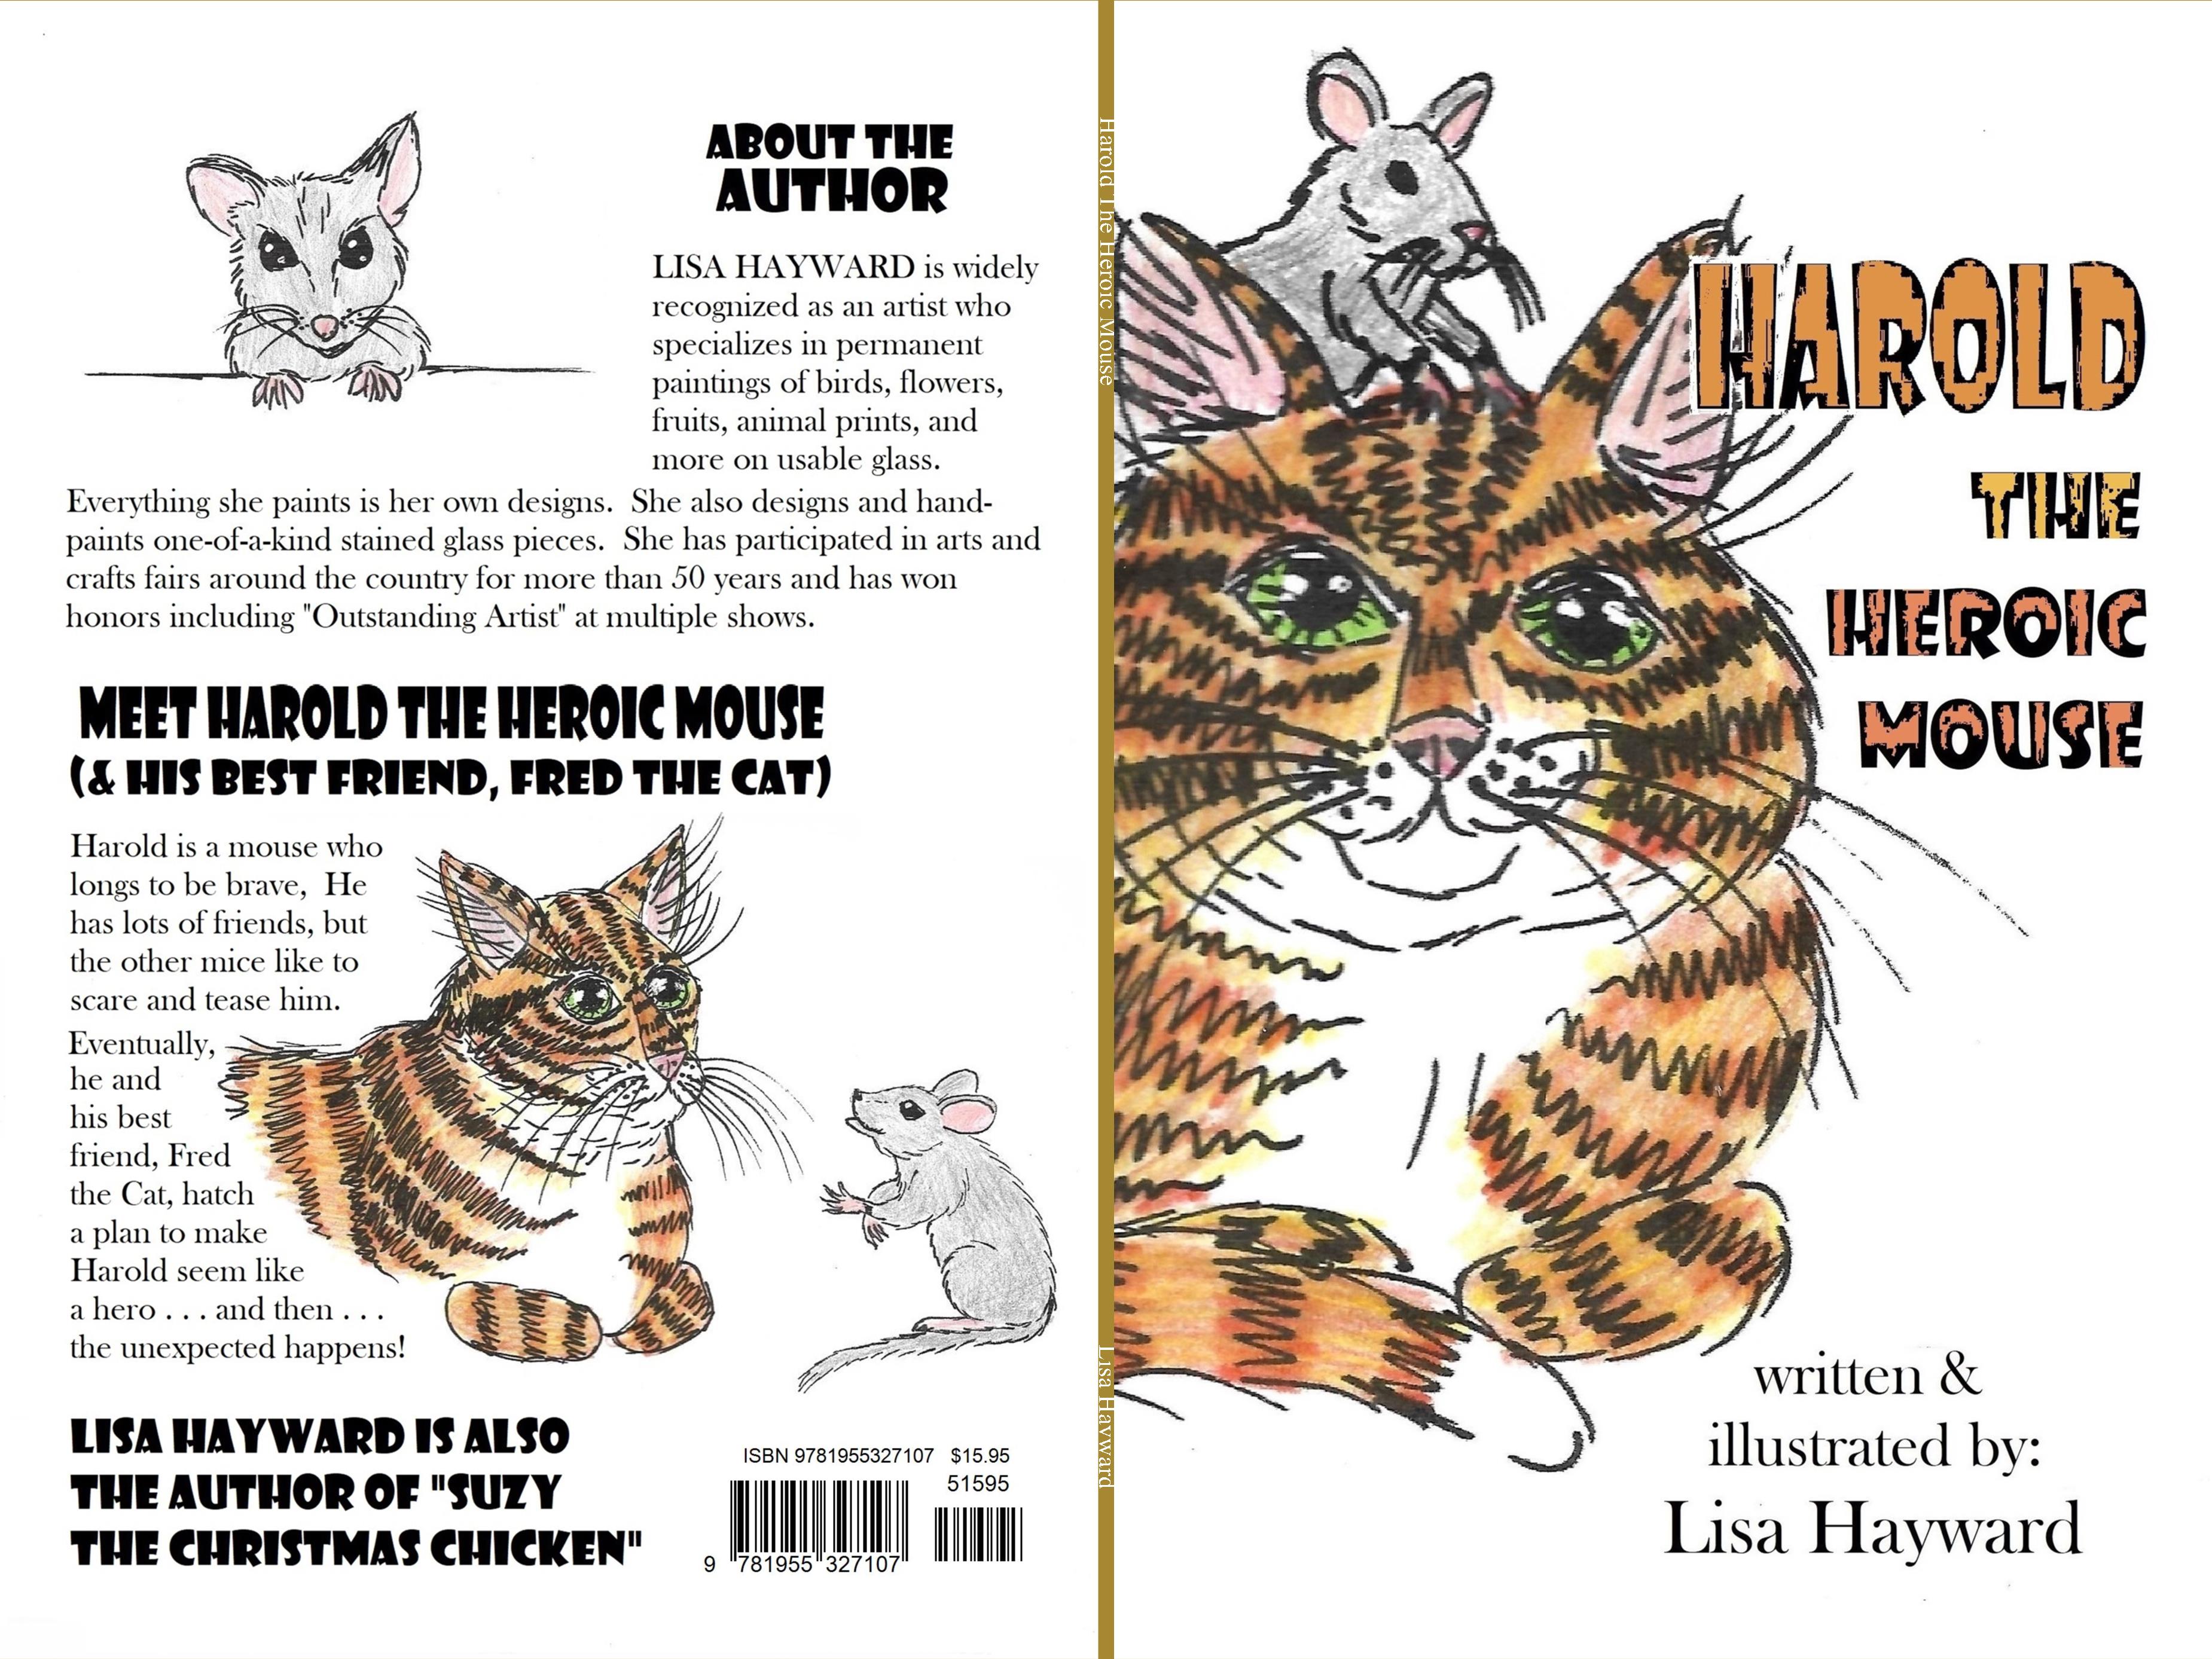 Harold The Heroic Mouse cover image